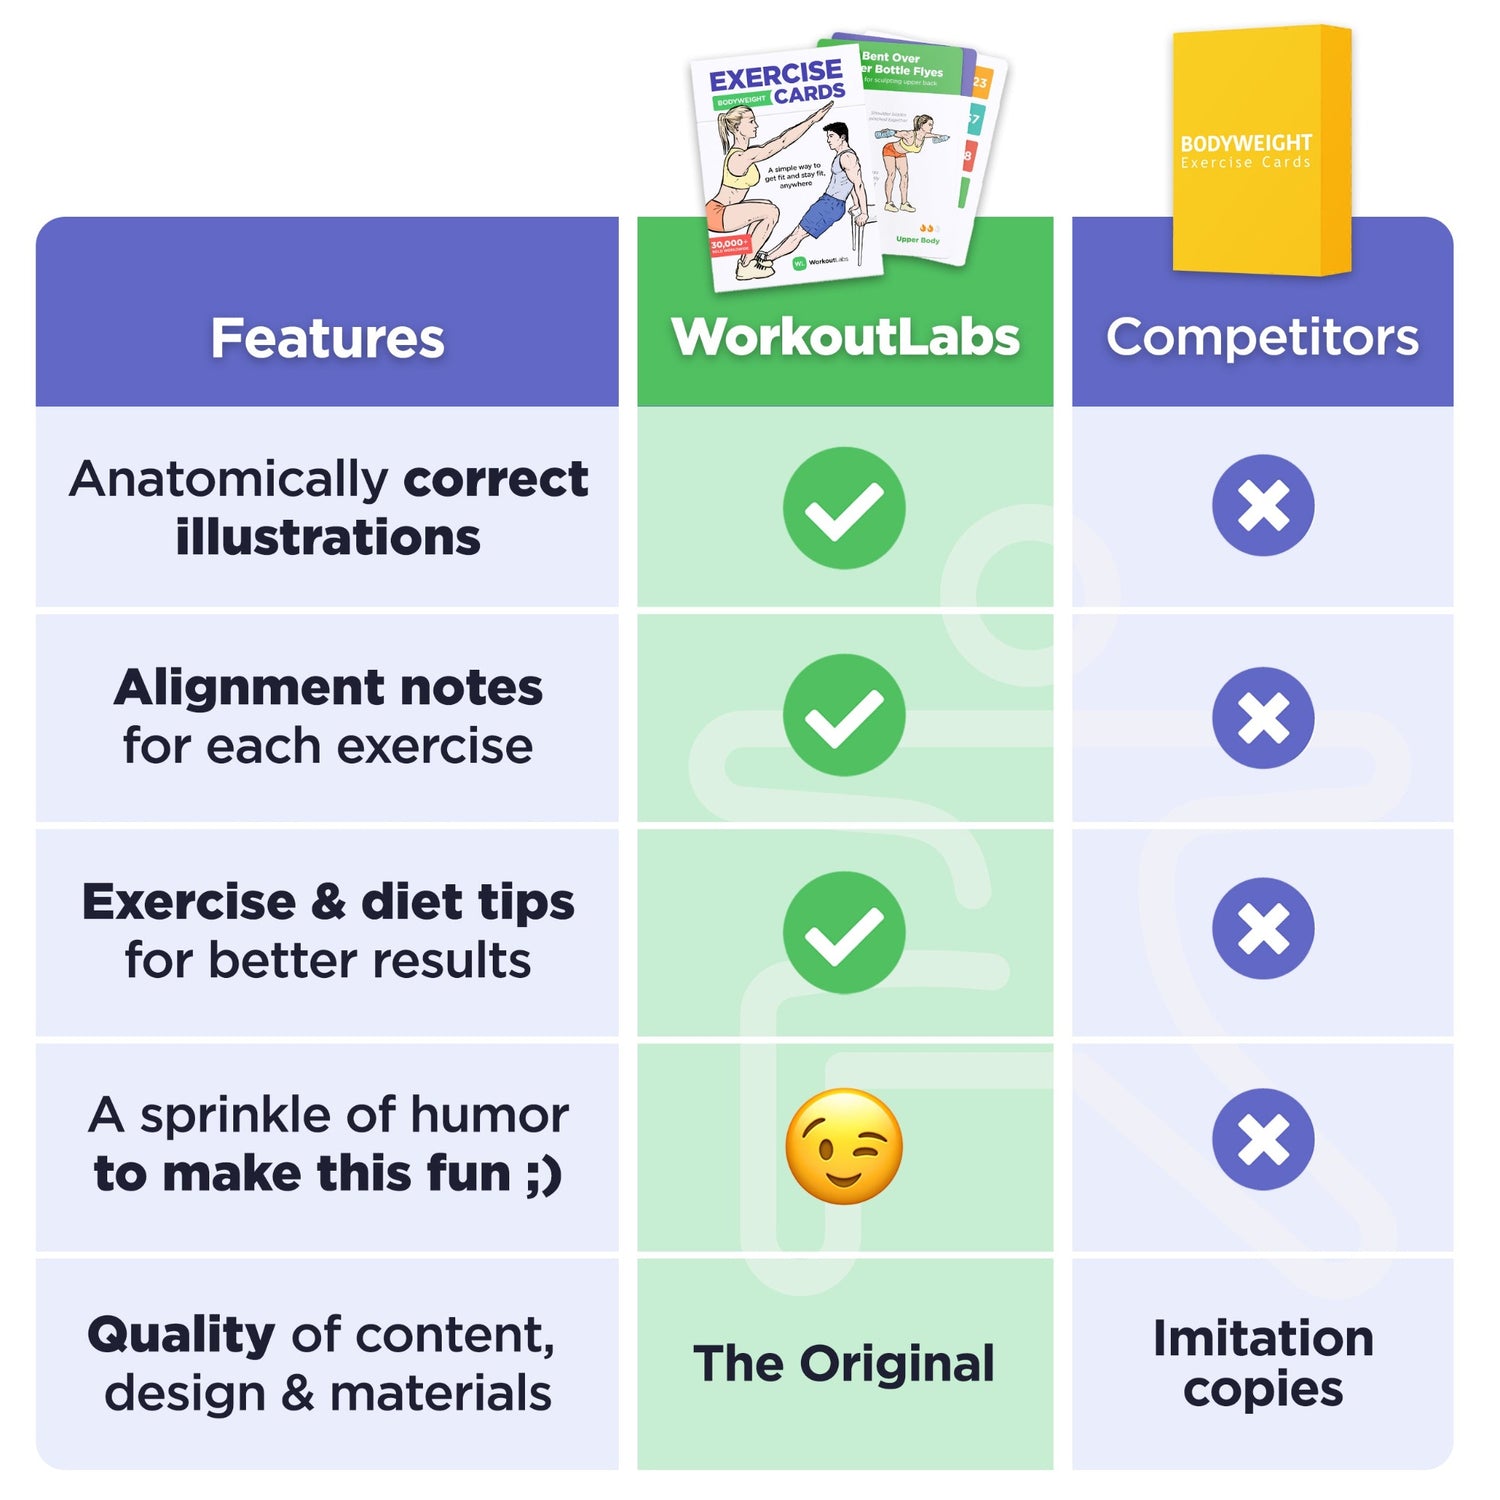 See why WorkoutLabs Exercise Cards are the best of its kind